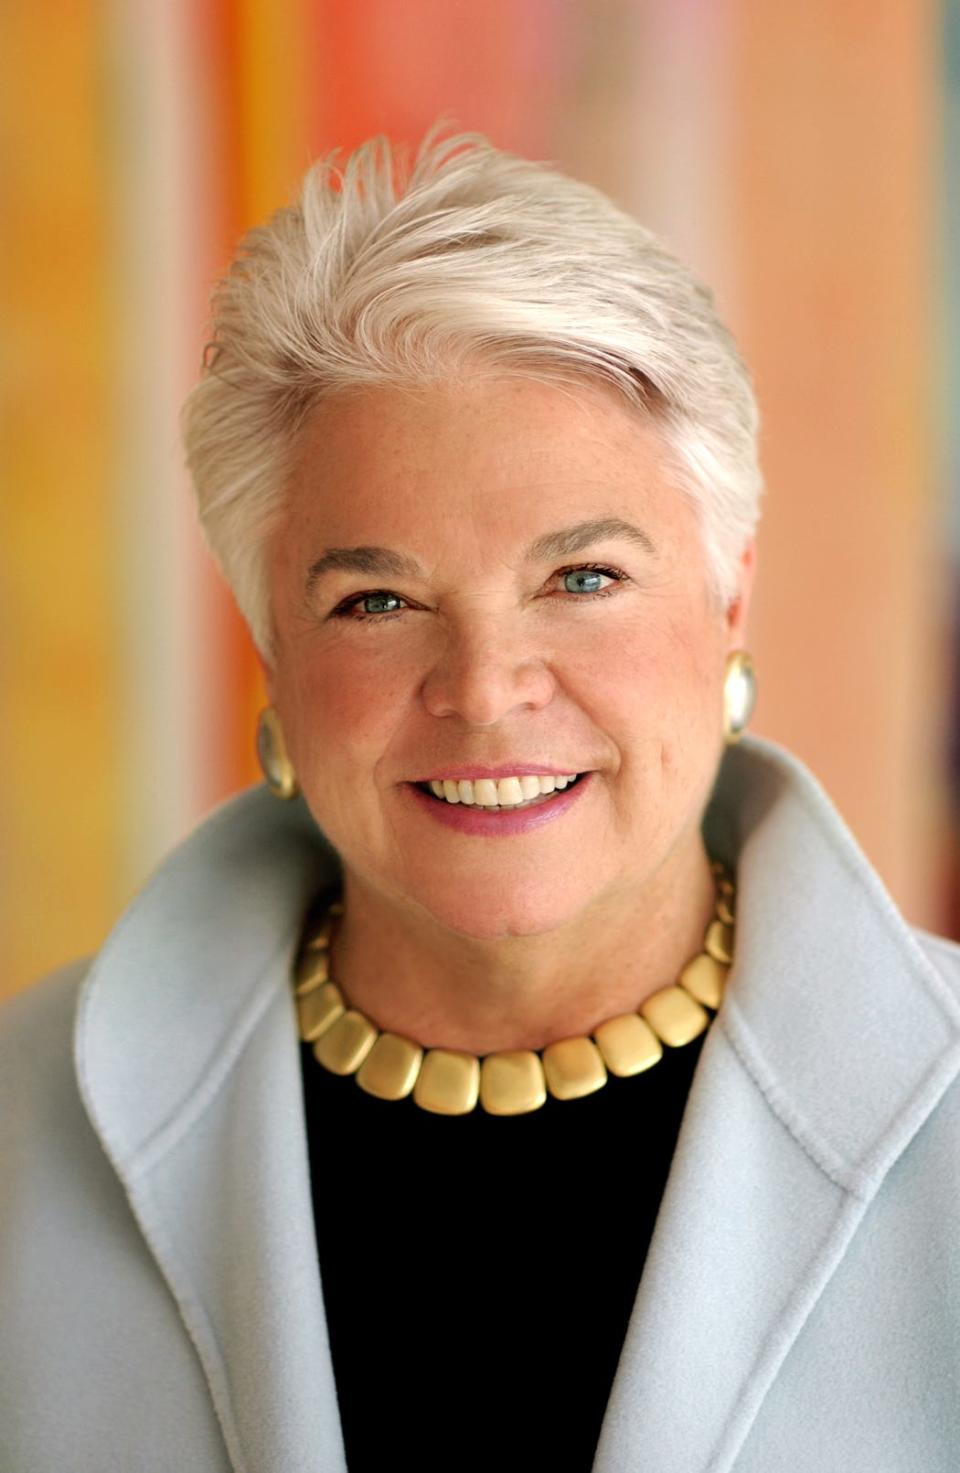 Pleasant Rowland, the creator of the American Girl doll brand, which is headquartered in Middleton, was named Forbes' 77th-richest self-made woman in America in 2023. Her estimated net worth is $350 million.